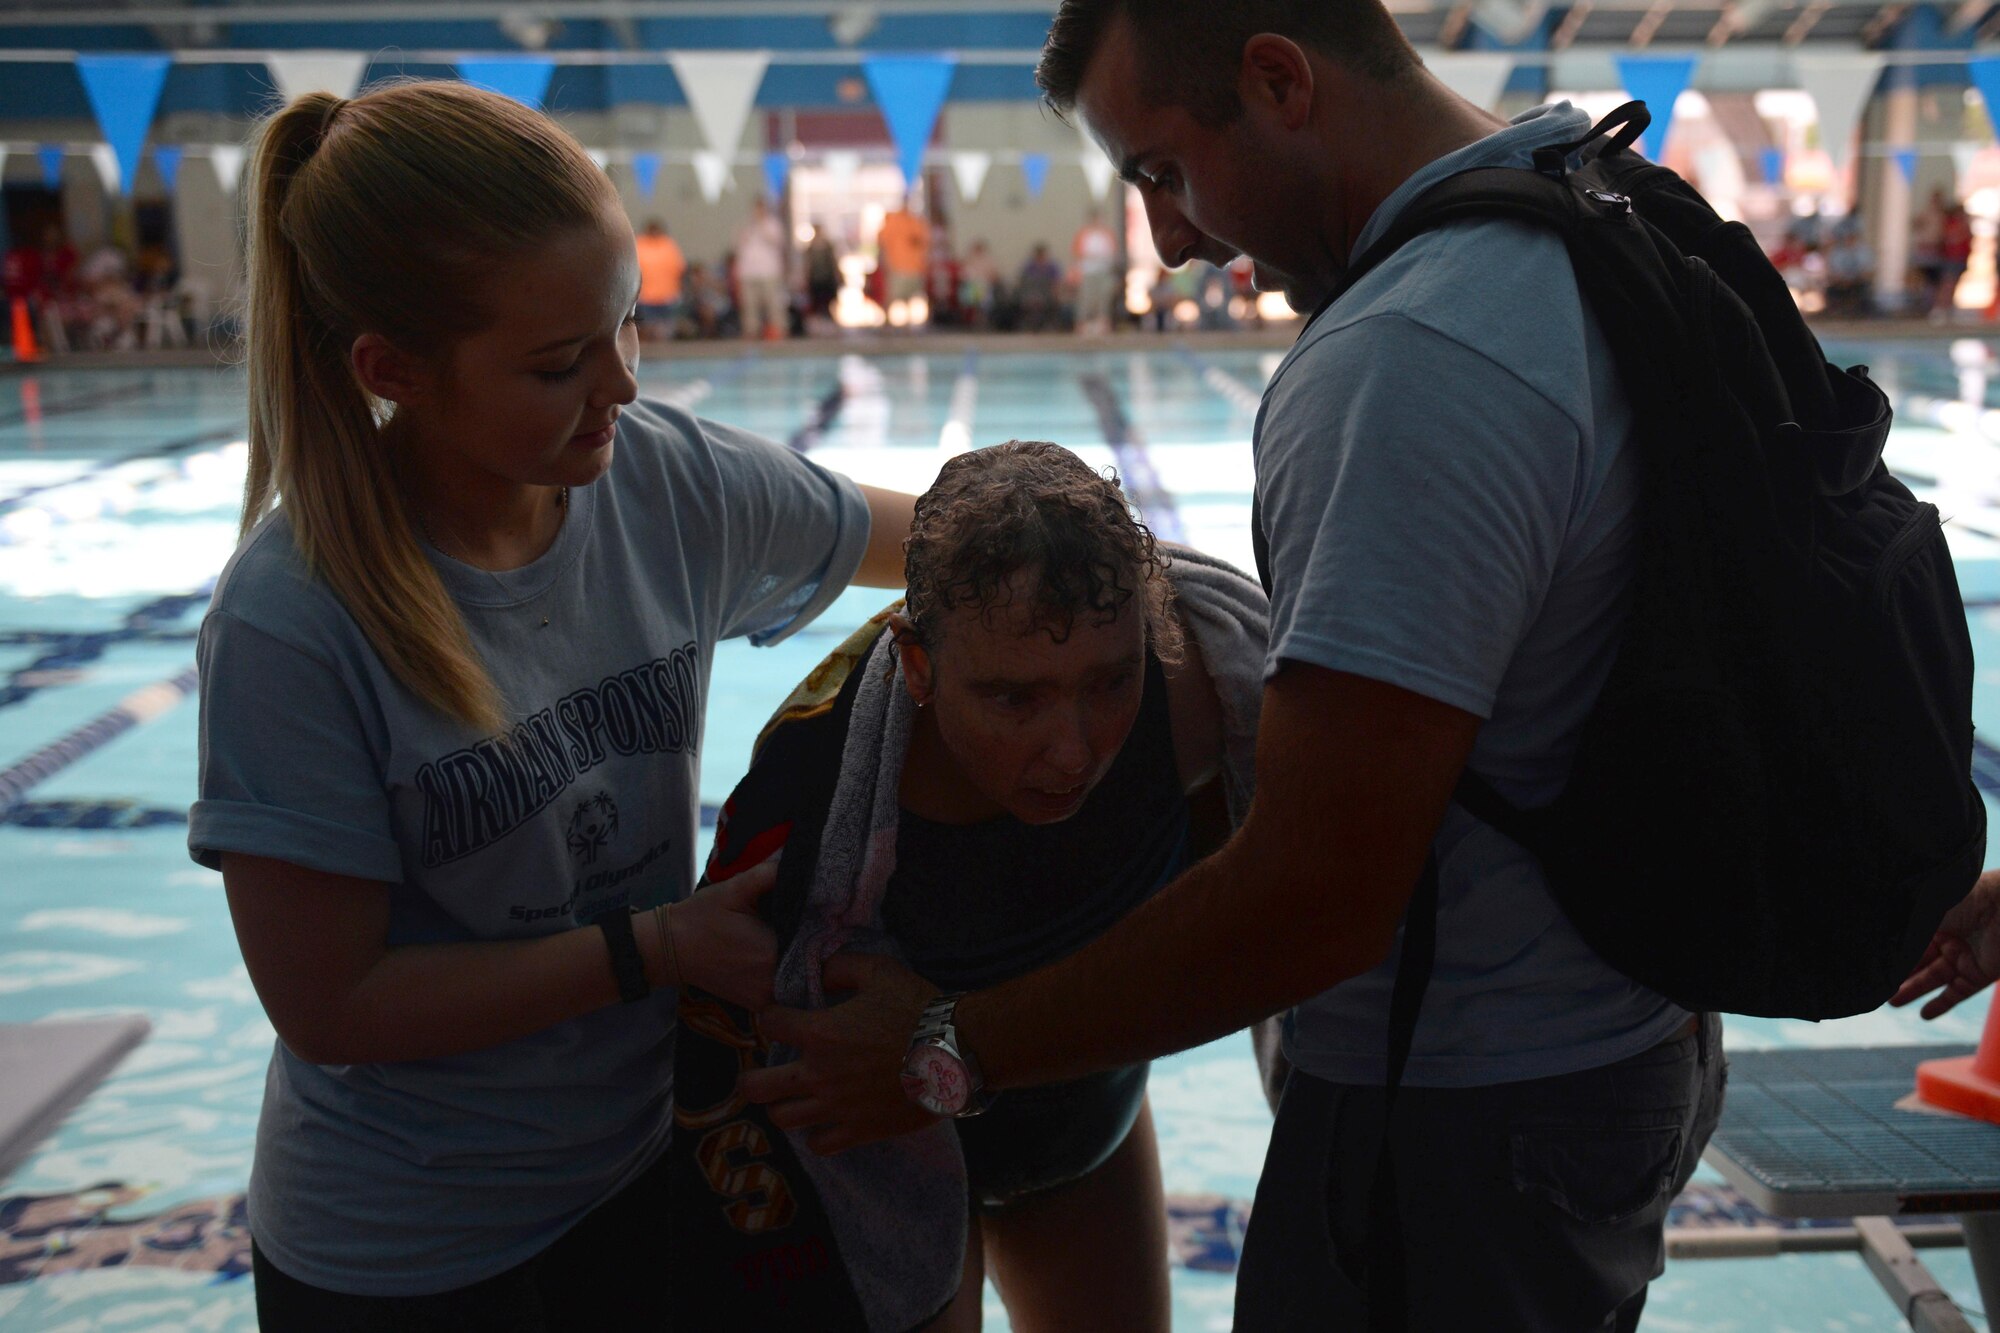 Airman Basic Ashlyn Tran and Senior Airman Hashim Mefleh, 336th Training Squadron students, aid Paula Carpenter, District 5 Special Olympics Mississippi athlete, after finishing the 50 meter backstroke at the Biloxi Natatorium May 21, 2016, Biloxi, Miss. Carpenter has competed in SOMS for more than 25 years and this year Tran and Mefleh are her Airman sponsors helping her compete in three aquatics events. (U.S. Air Force photo by Travis Beihl) 